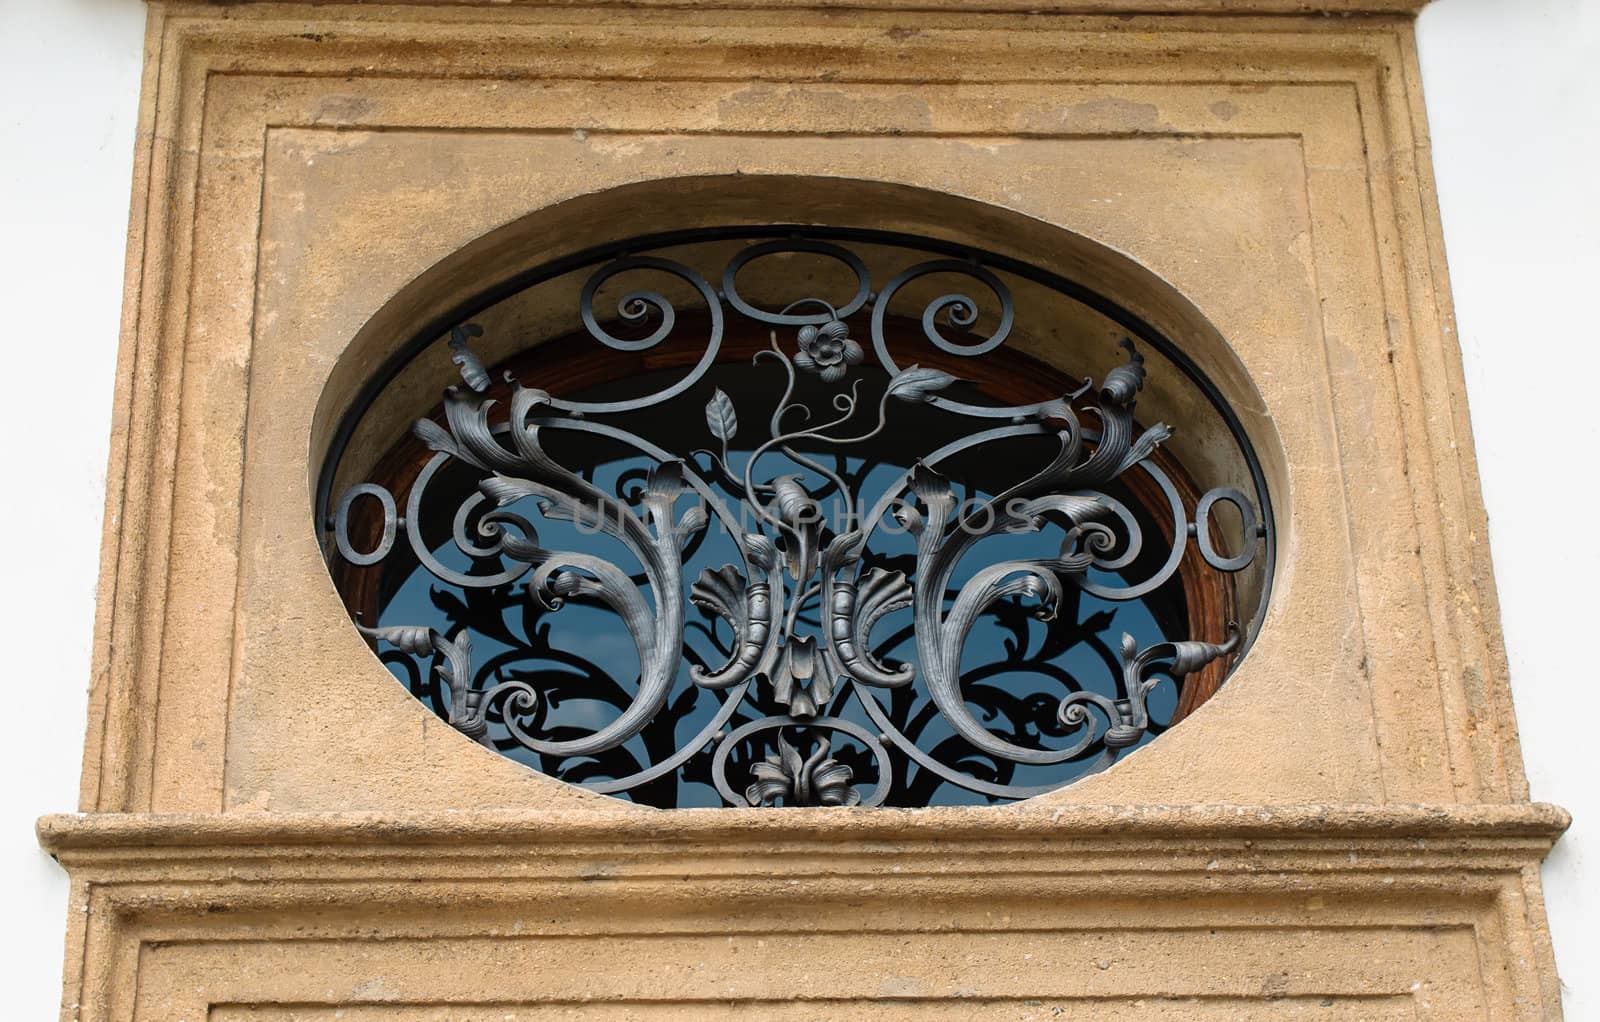 The beautiful forged on an oval window on street Prague